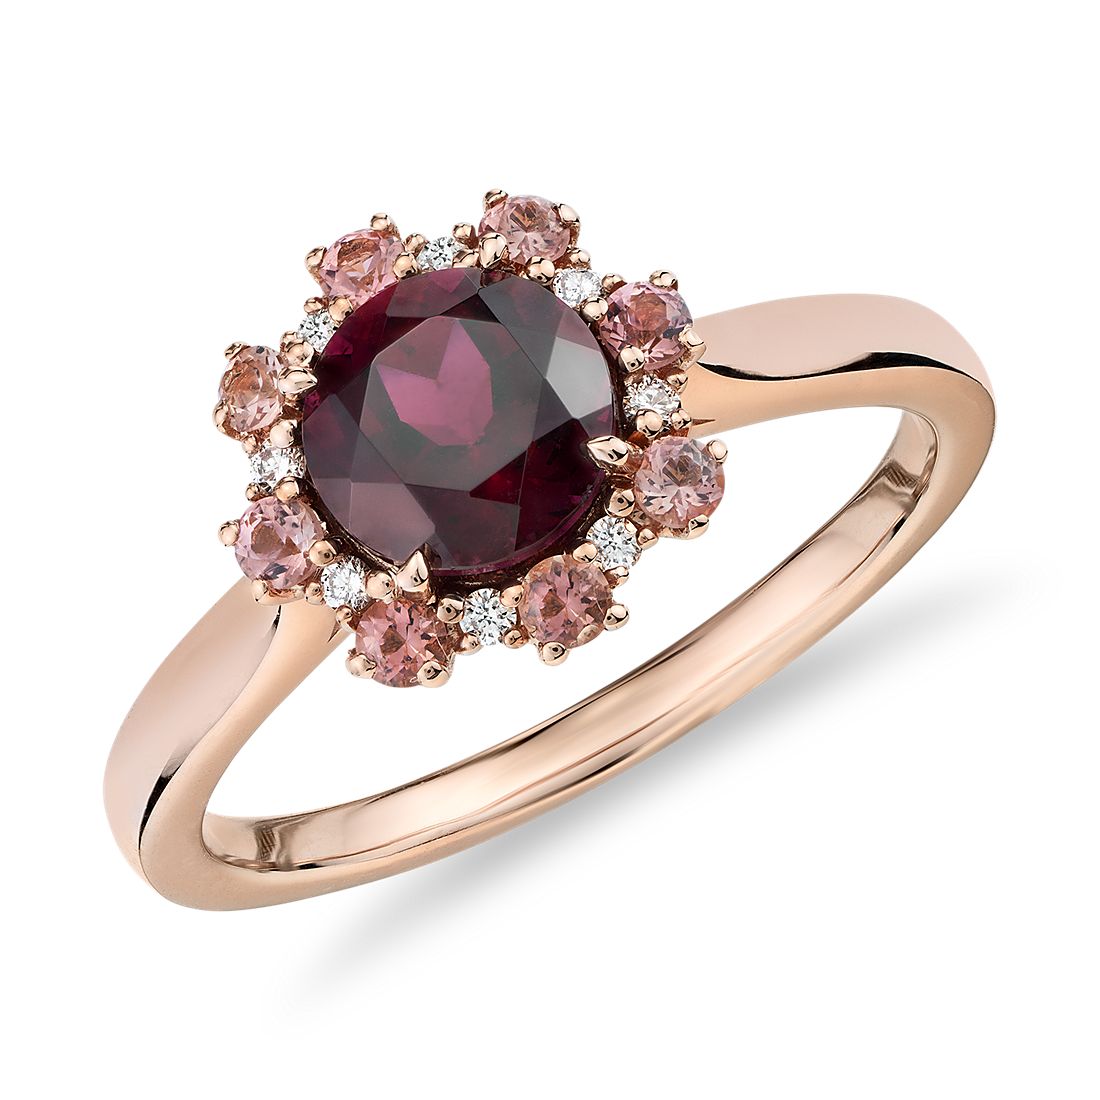 Garnet Ring with Diamond Halo and Pink Tourmaline by Blue Nile